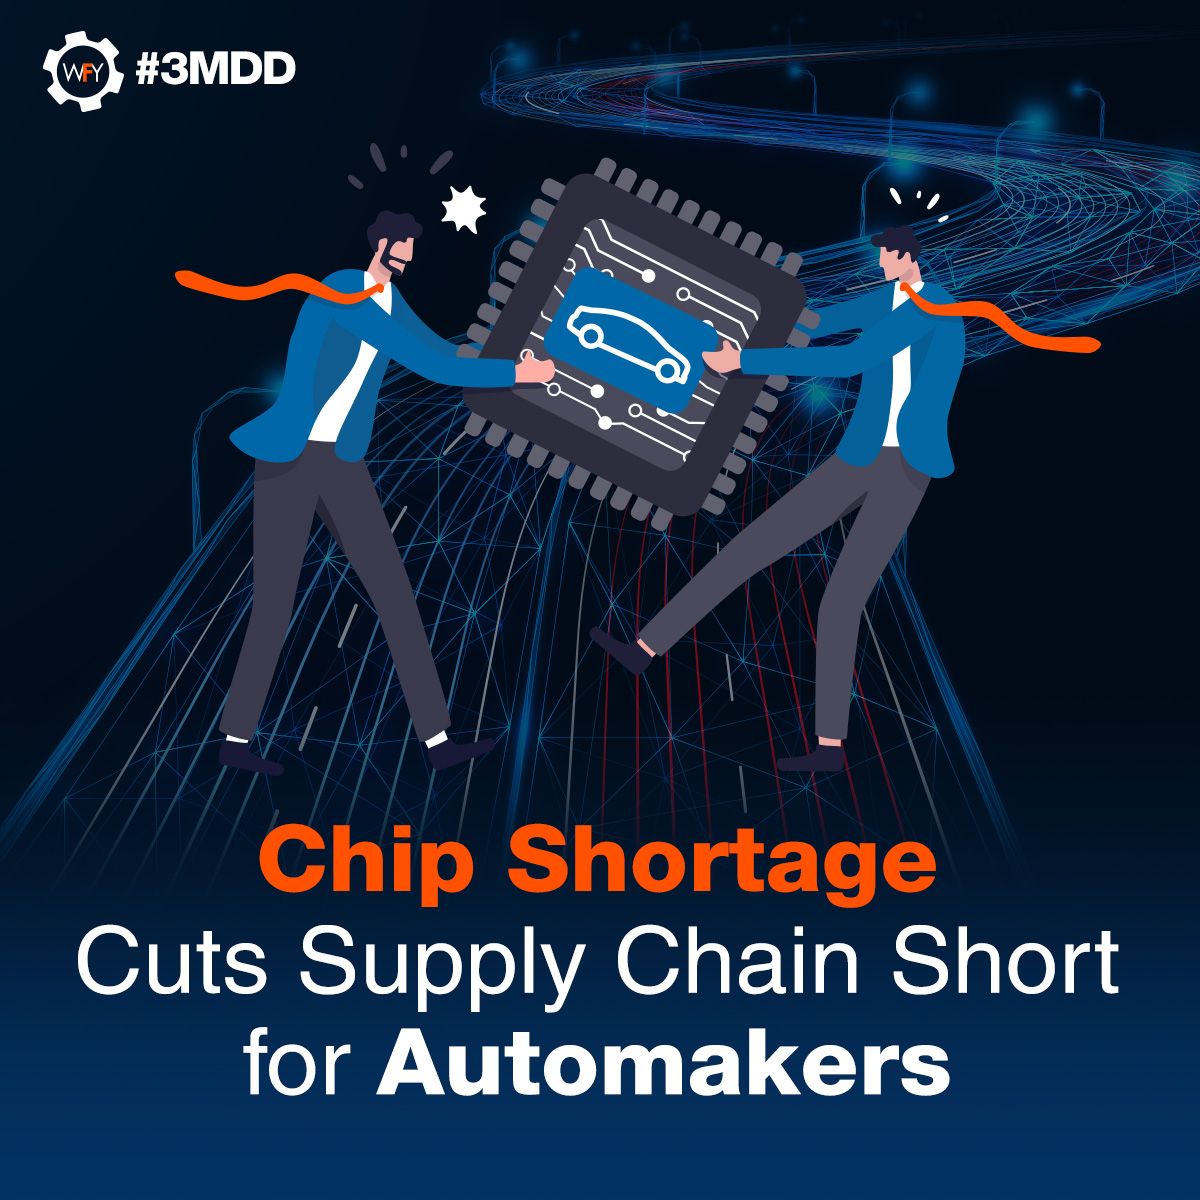 Chip Shortage Cuts Supply Chain Short for Automakers